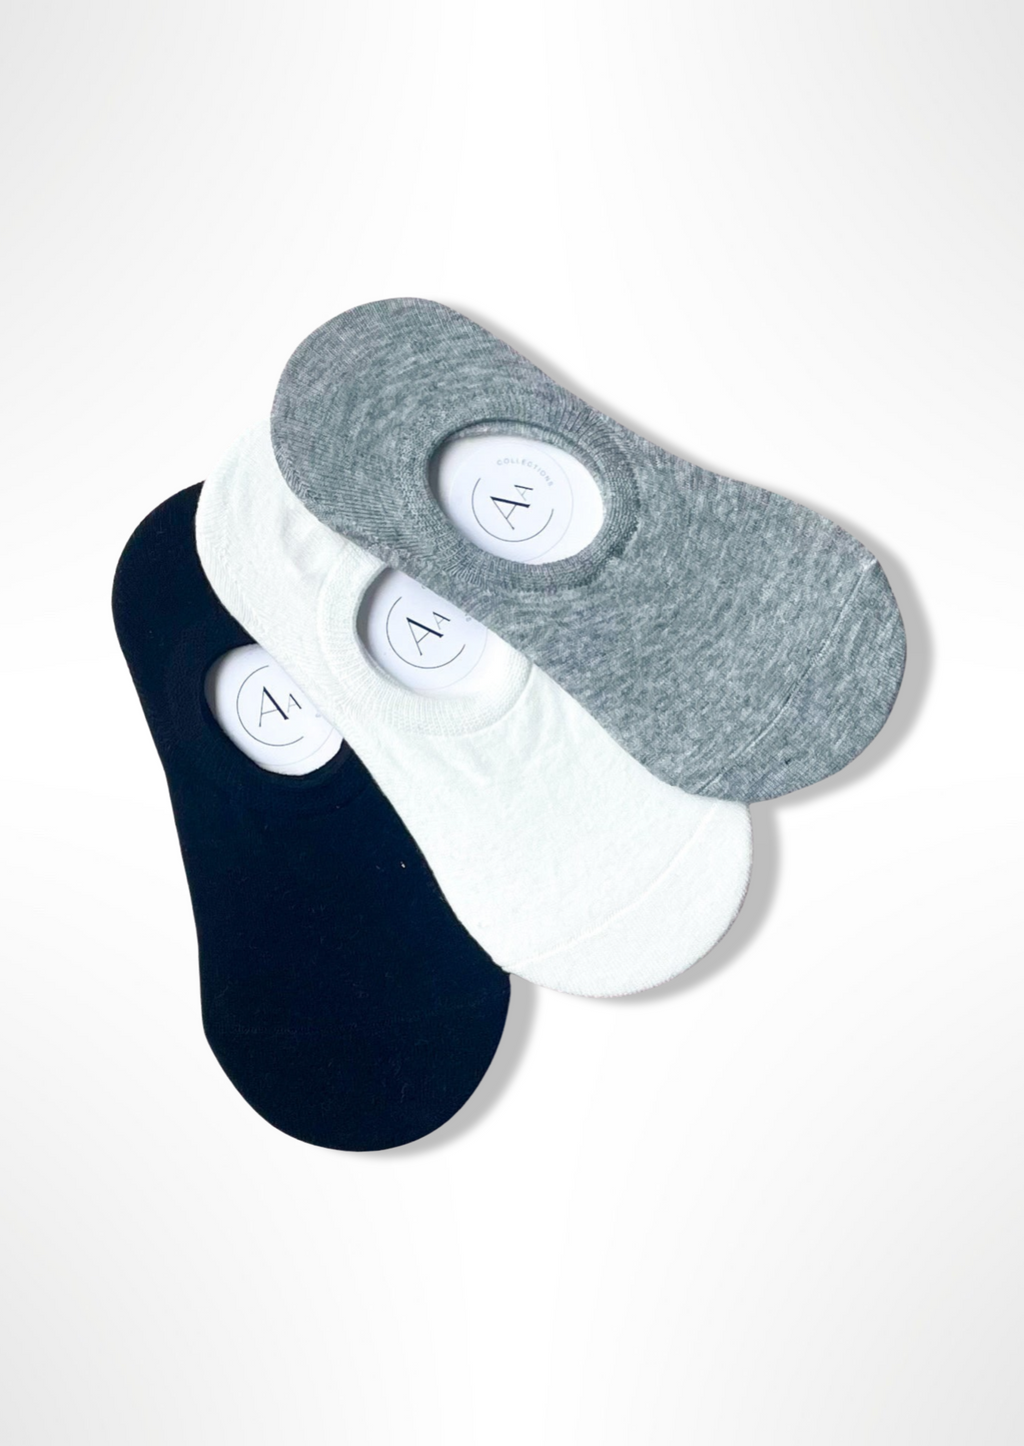 <h3 data-mce-fragment="1">Sneaker Socks - 3 Pack</h3> <p>We have the perfect new sneaker sock.&nbsp;</p> <p><span>Our Cotton Non-Slip Plain sneaker Socks are the perfect addition to your shoe collection. Made from soft cotton, these sneaker socks provide ultimate comfort while keeping your feet dry and fresh.</span></p>